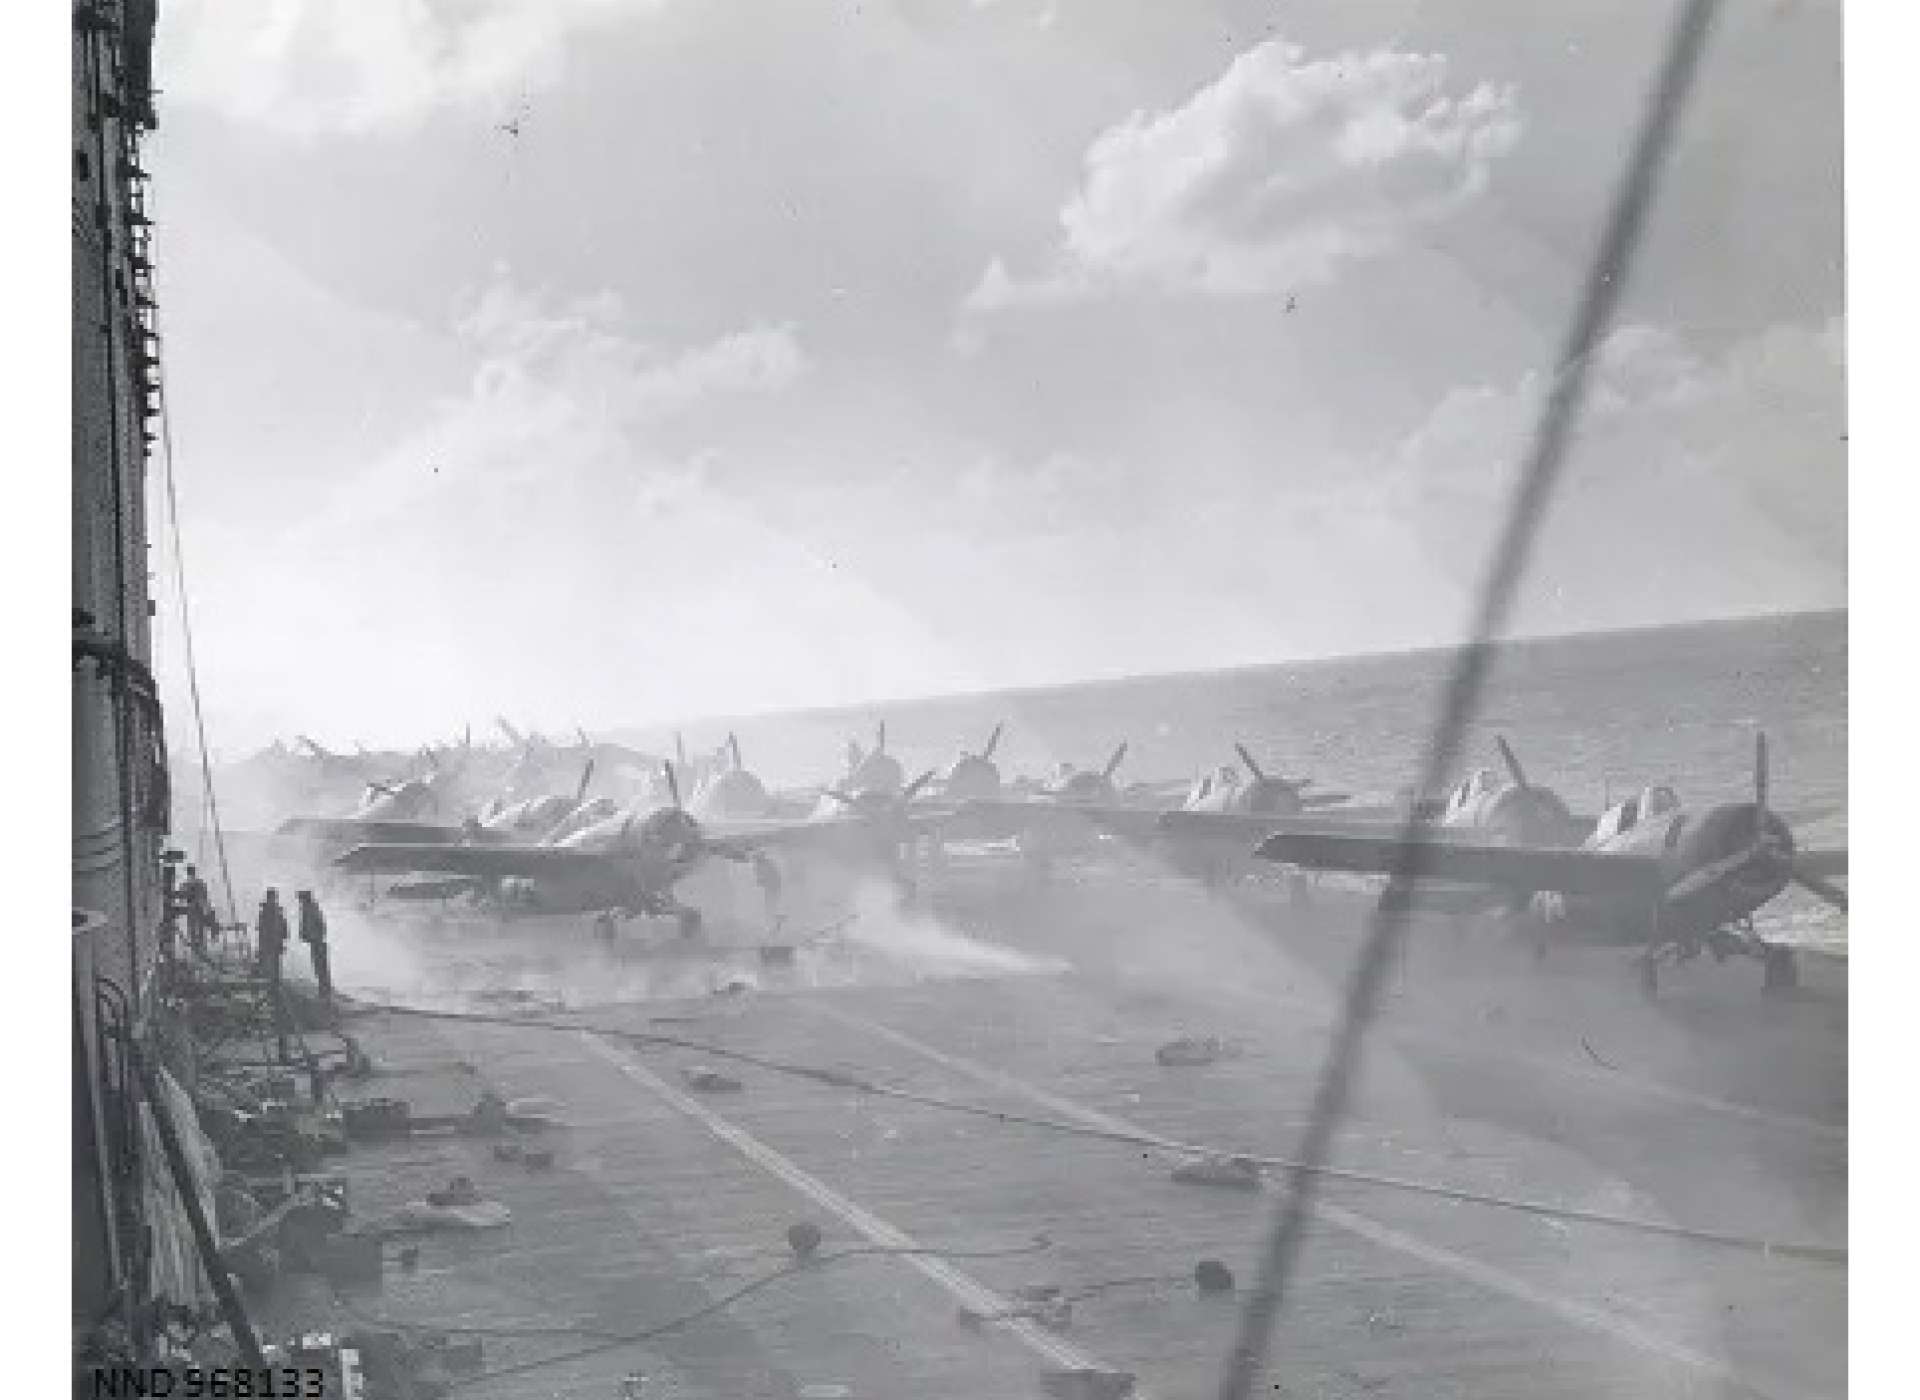 Deck of the Lexington just prior to the explosion, sometime after 1400 hours by which time all planes had been landed. Photo courtesy of the National Archives and Records Administration.